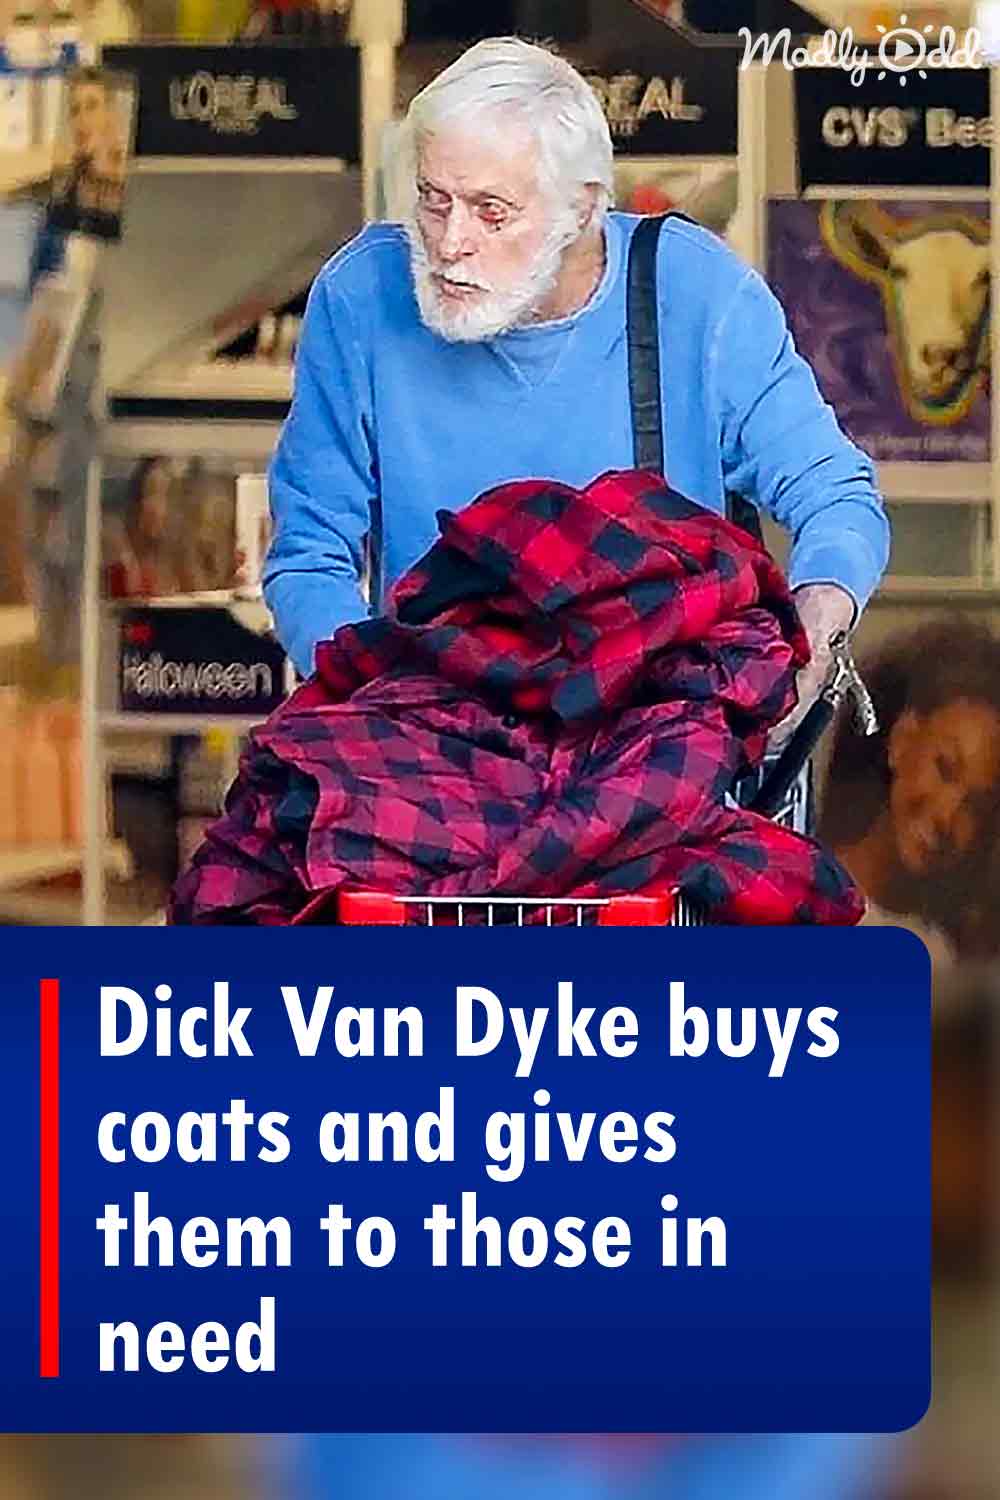 Dick Van Dyke buys coats and gives them to those in need